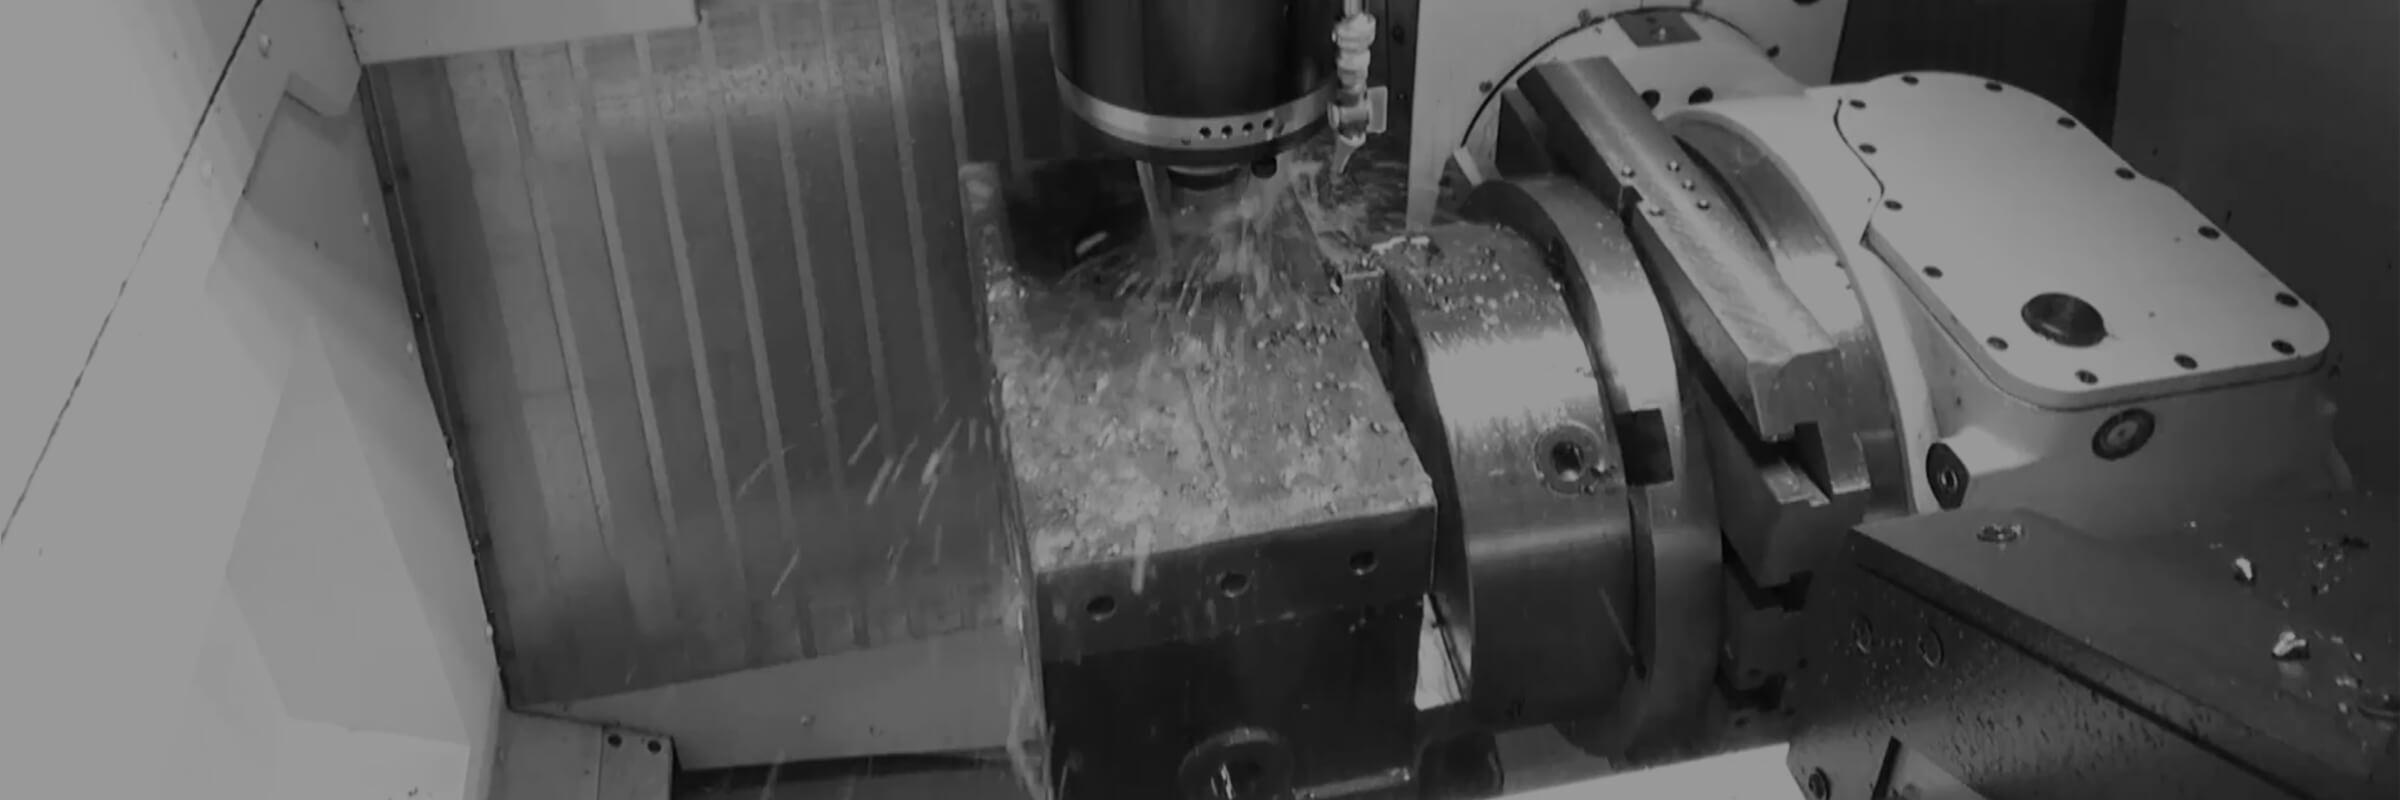 GETTING THE MOST OUT OF 5-AXIS